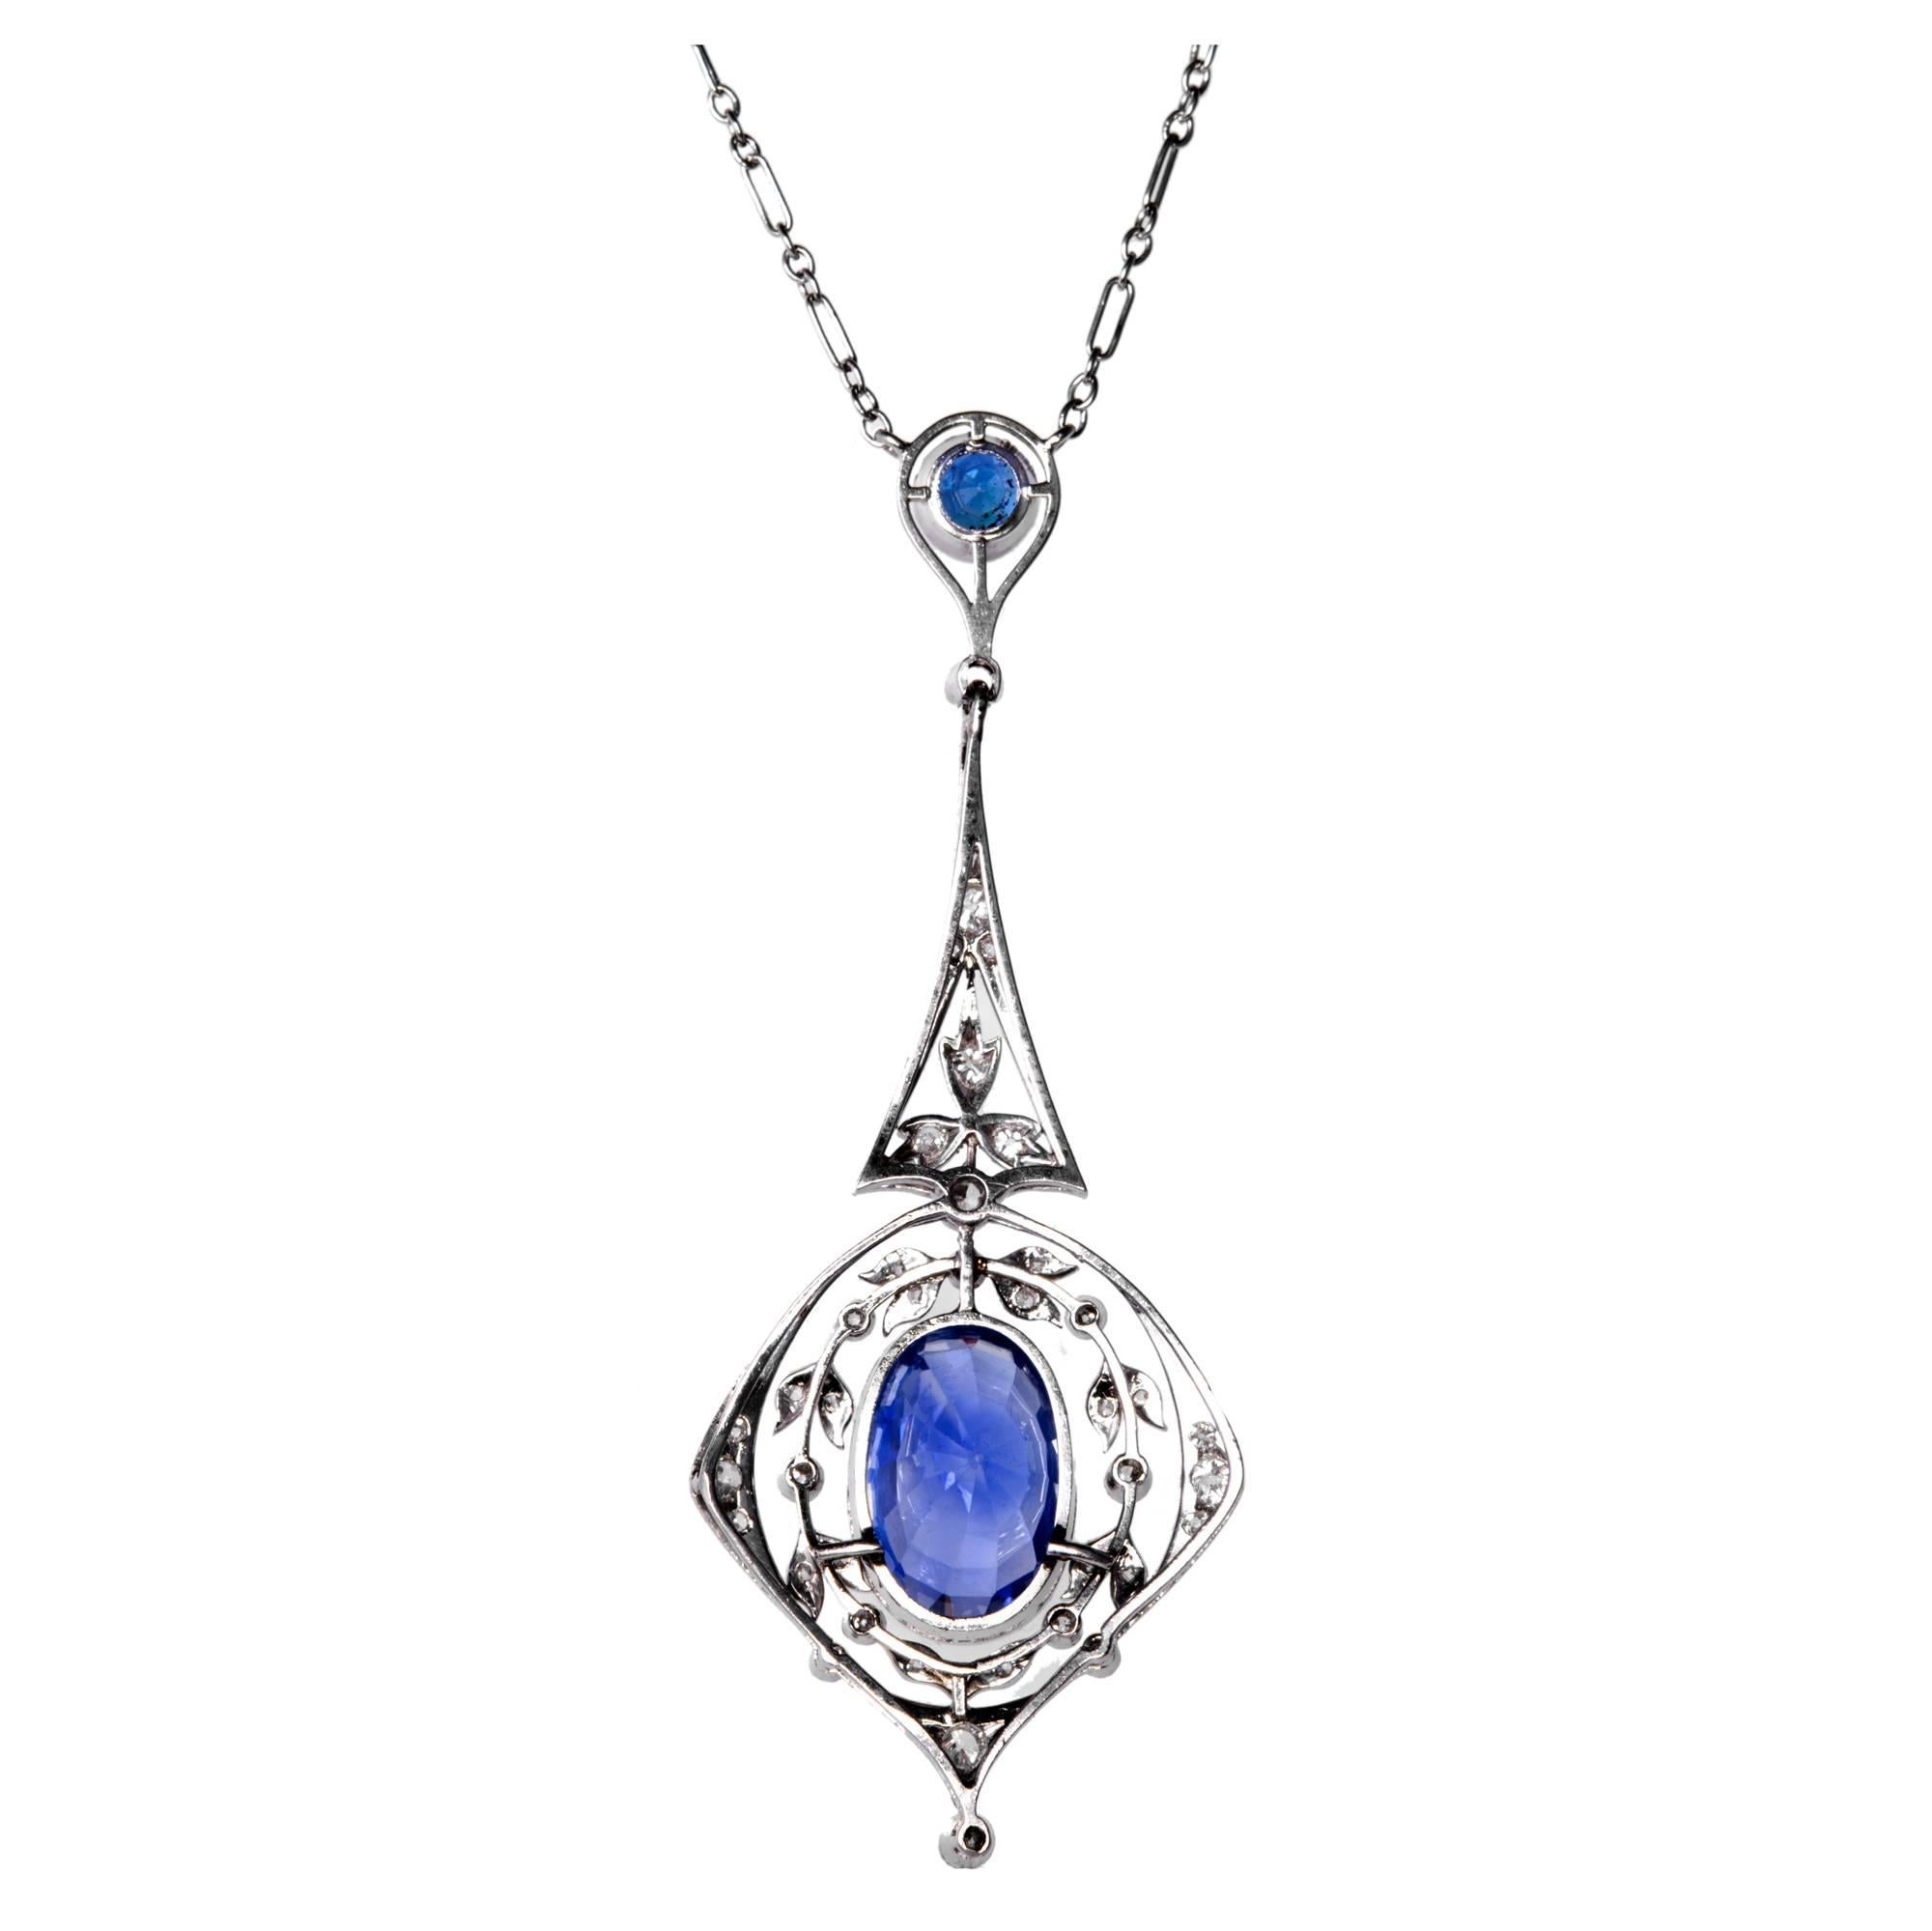 Periwinkle Bright Blue Sapphire and diamond platinum necklace pendant. AGL certified Natural No Heat Ceylon (Sri Lanka) Origin. The main sapphire is a purple periwinkle blue in an open work platinum setting surround by sparkly diamonds. The chain is